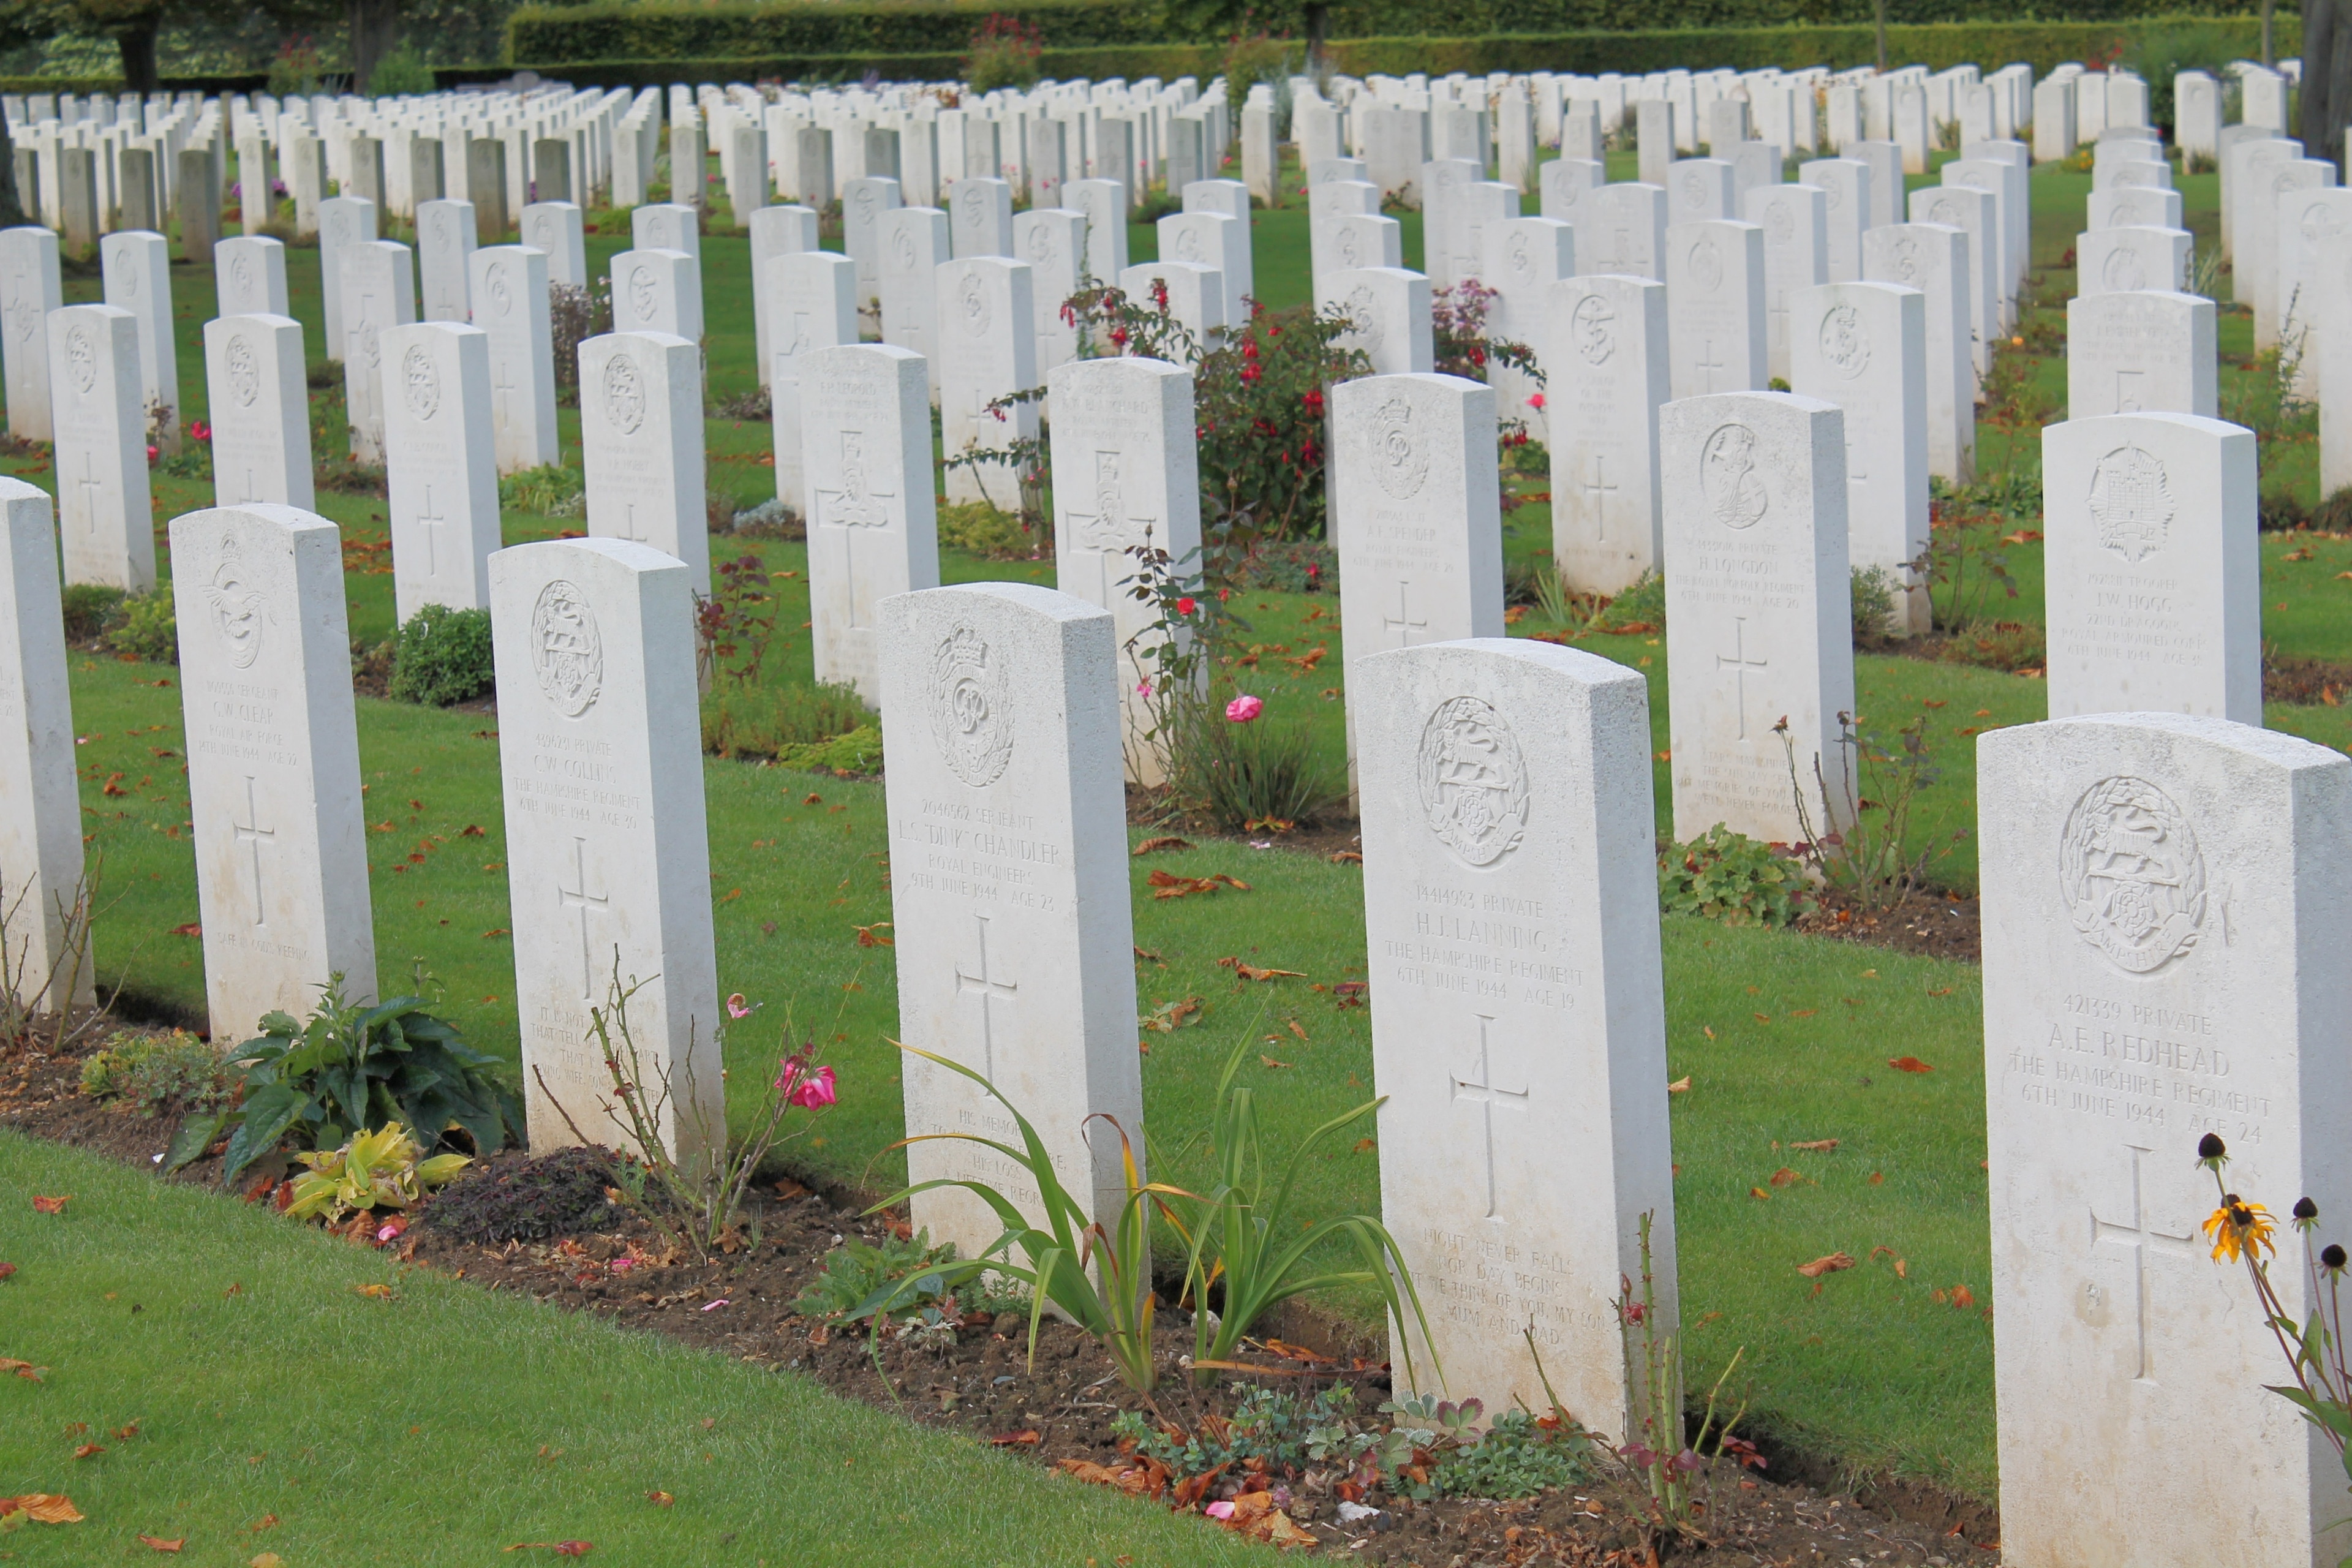 Bayeux War Cemetery, in Normandy, France. 